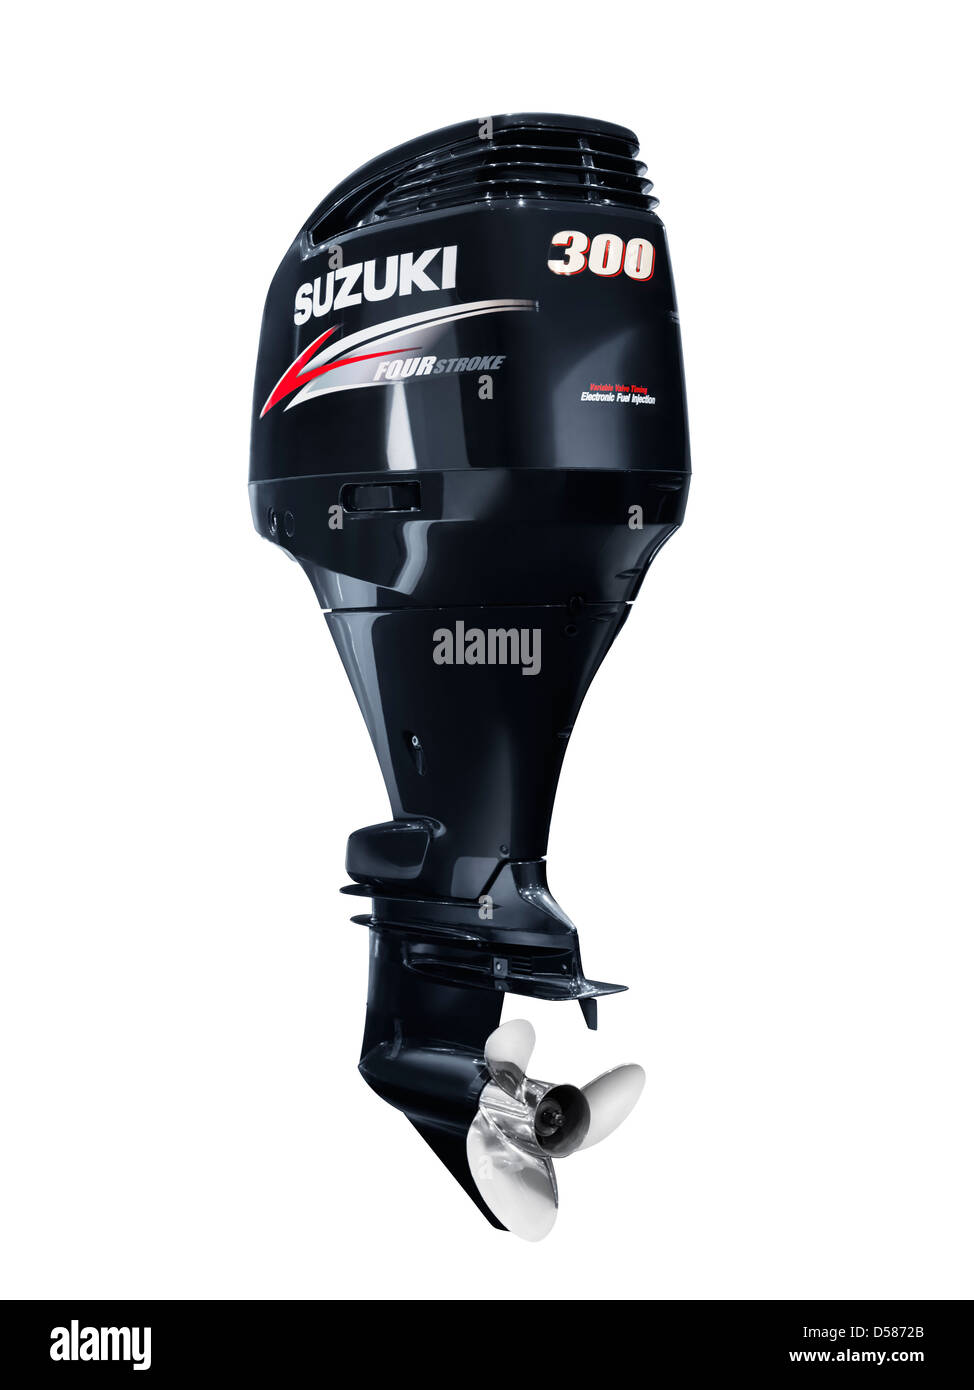 Suzuki 300 outboard boat motor four stroke engine isolated on white background with clipping path Stock Photo